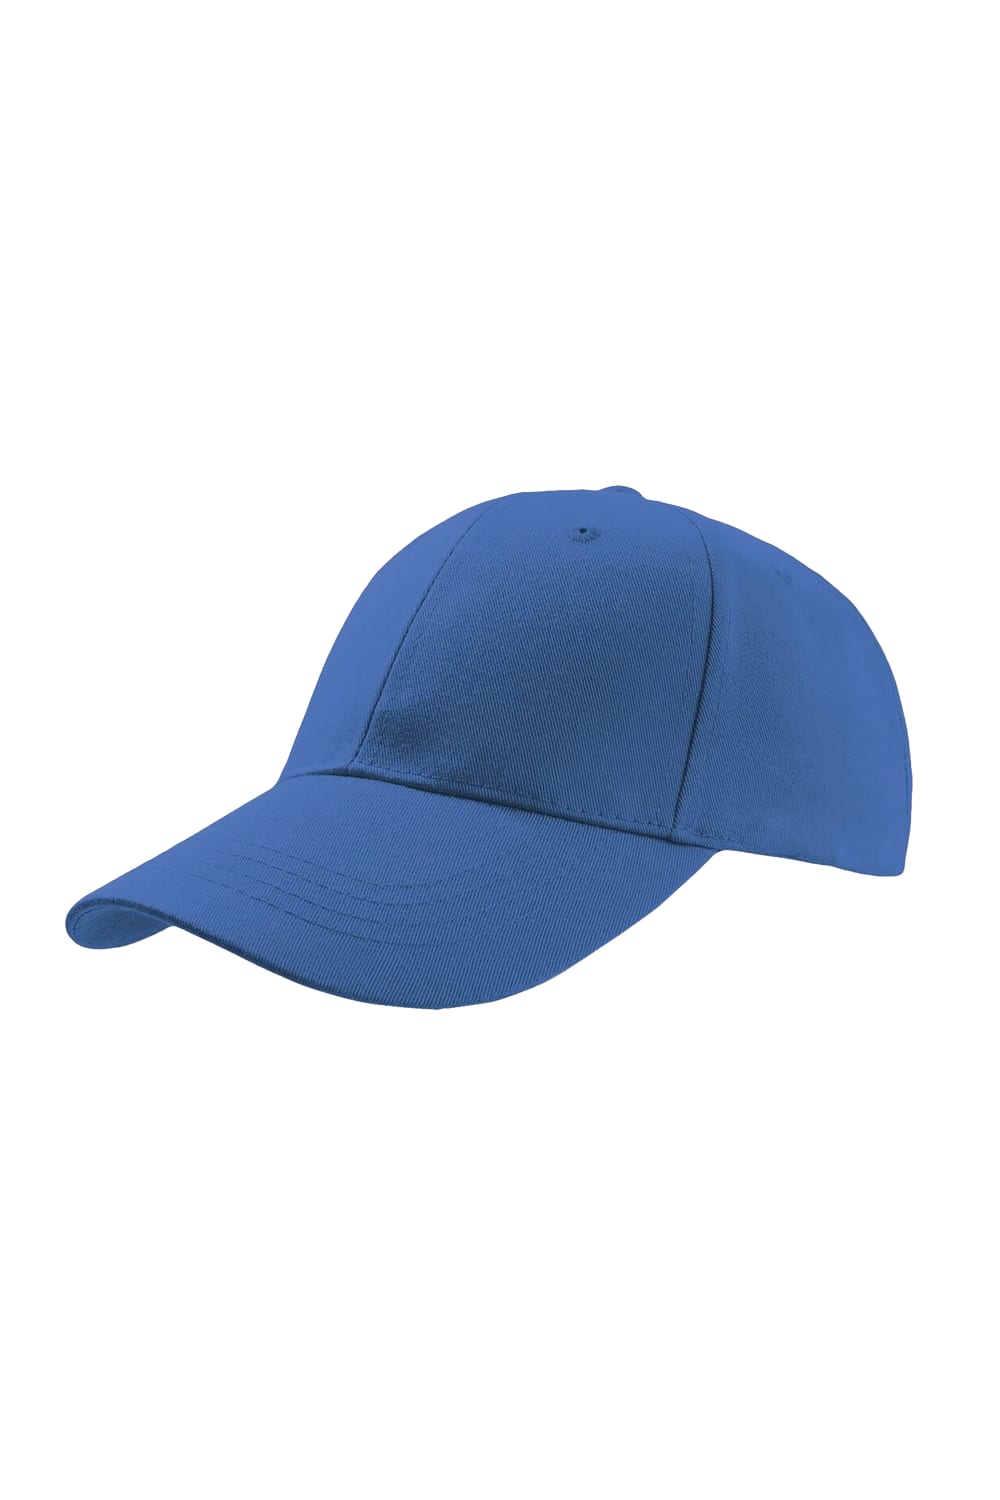 Zoom Sports 6 Panel Baseball Cap - Pack of 2 In Royal